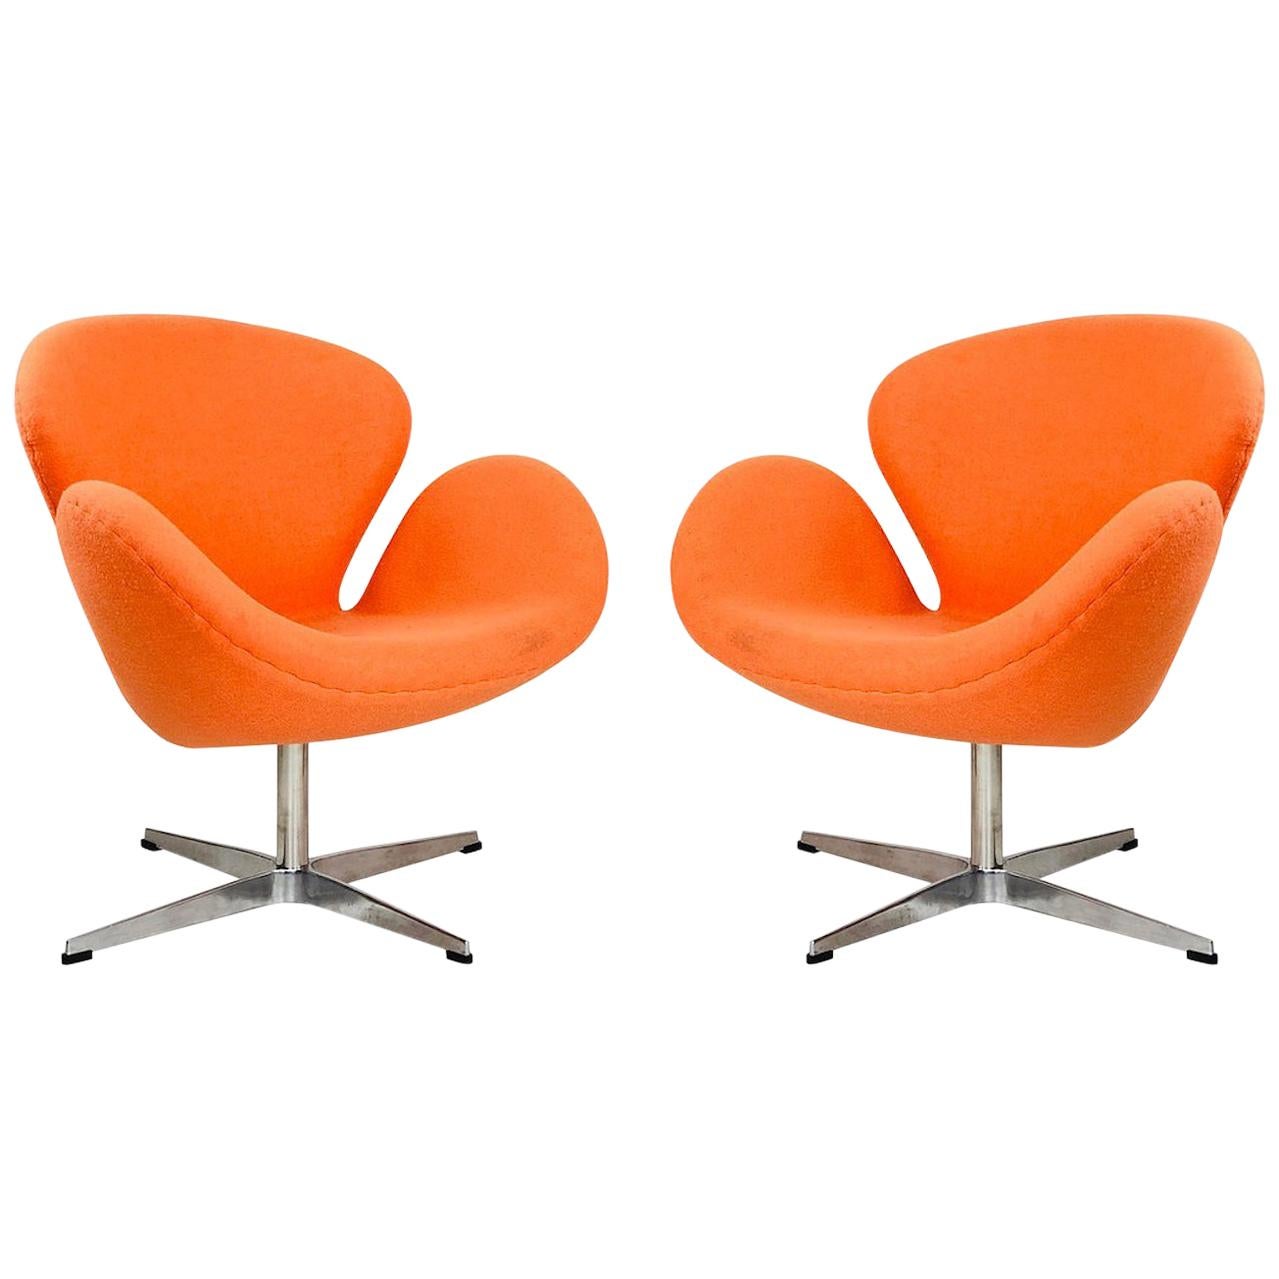 Pair of Vintage Swan Chairs in the Style of Arne Jacobsen